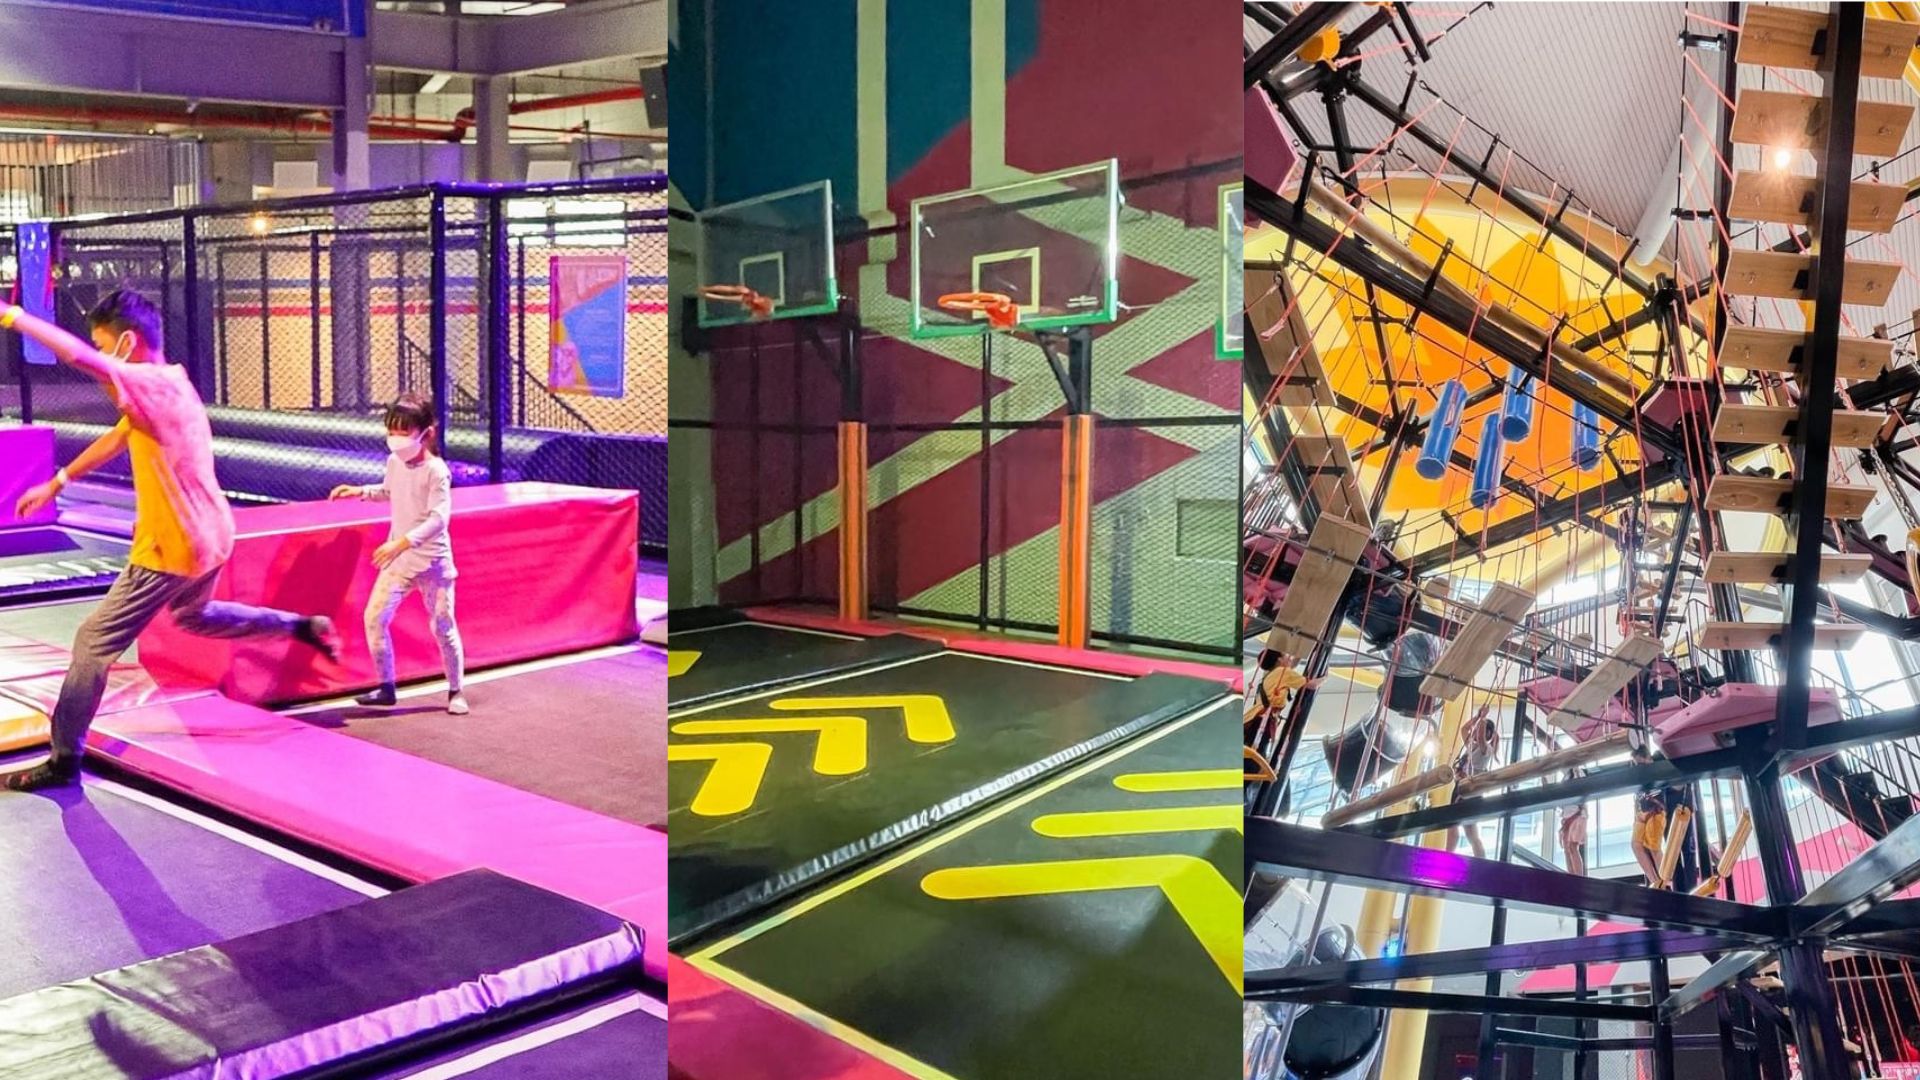 From jumping around to shooting hoops, the park has a lot to offer!